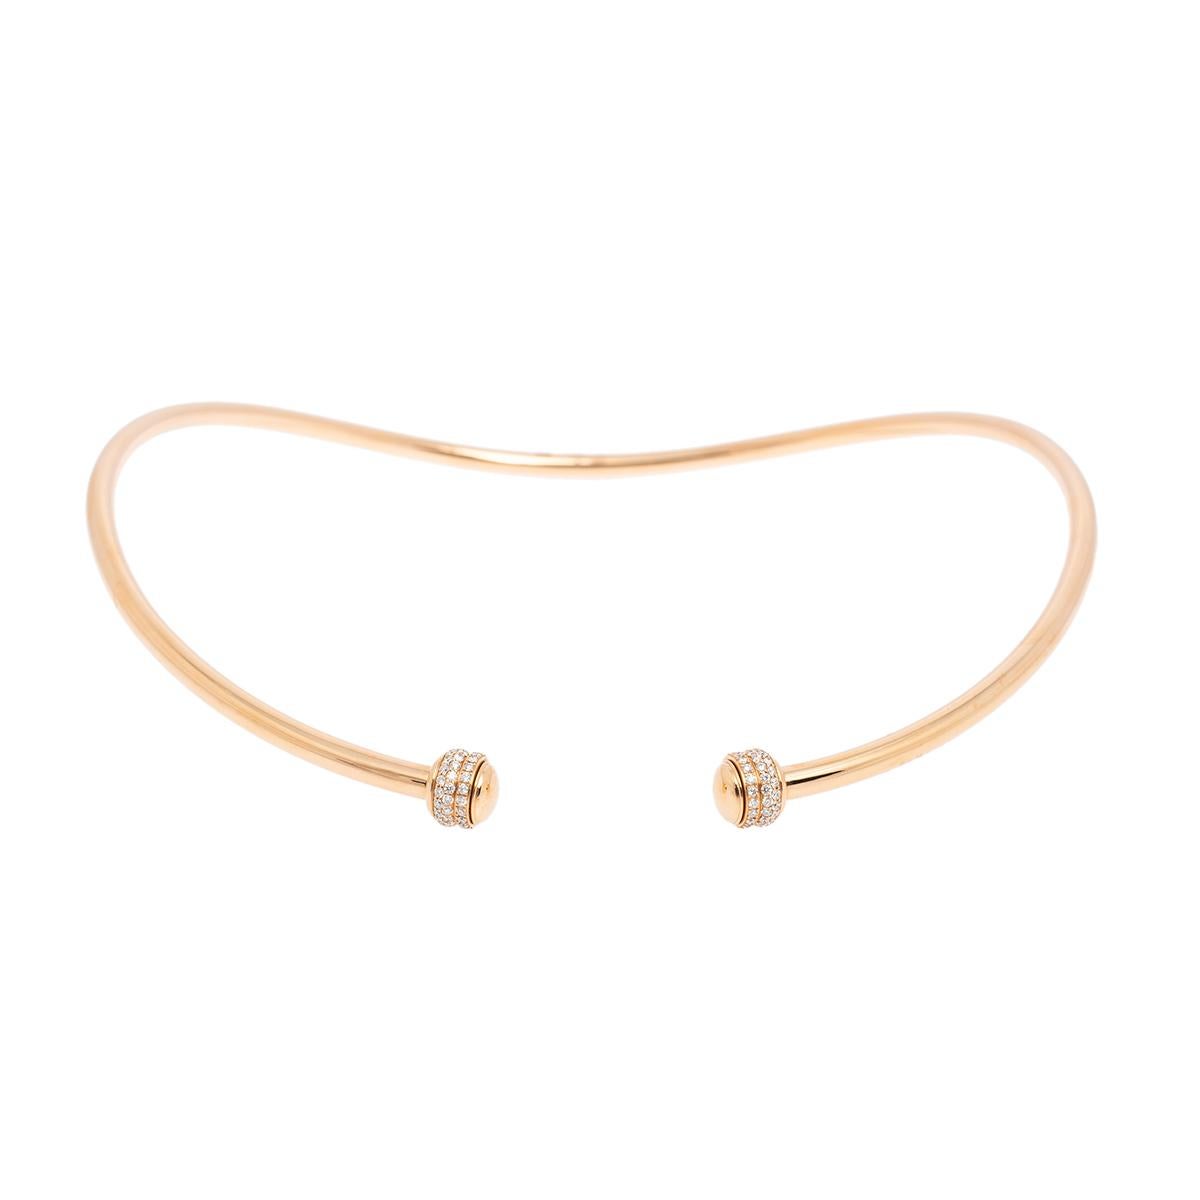 Show your love for fine artistry and luxury accessories with this stunning necklace from Piaget that is made from 18k rose gold. One of the most popular collections from Piaget is their Possession collection which is defined by rotating rings. The